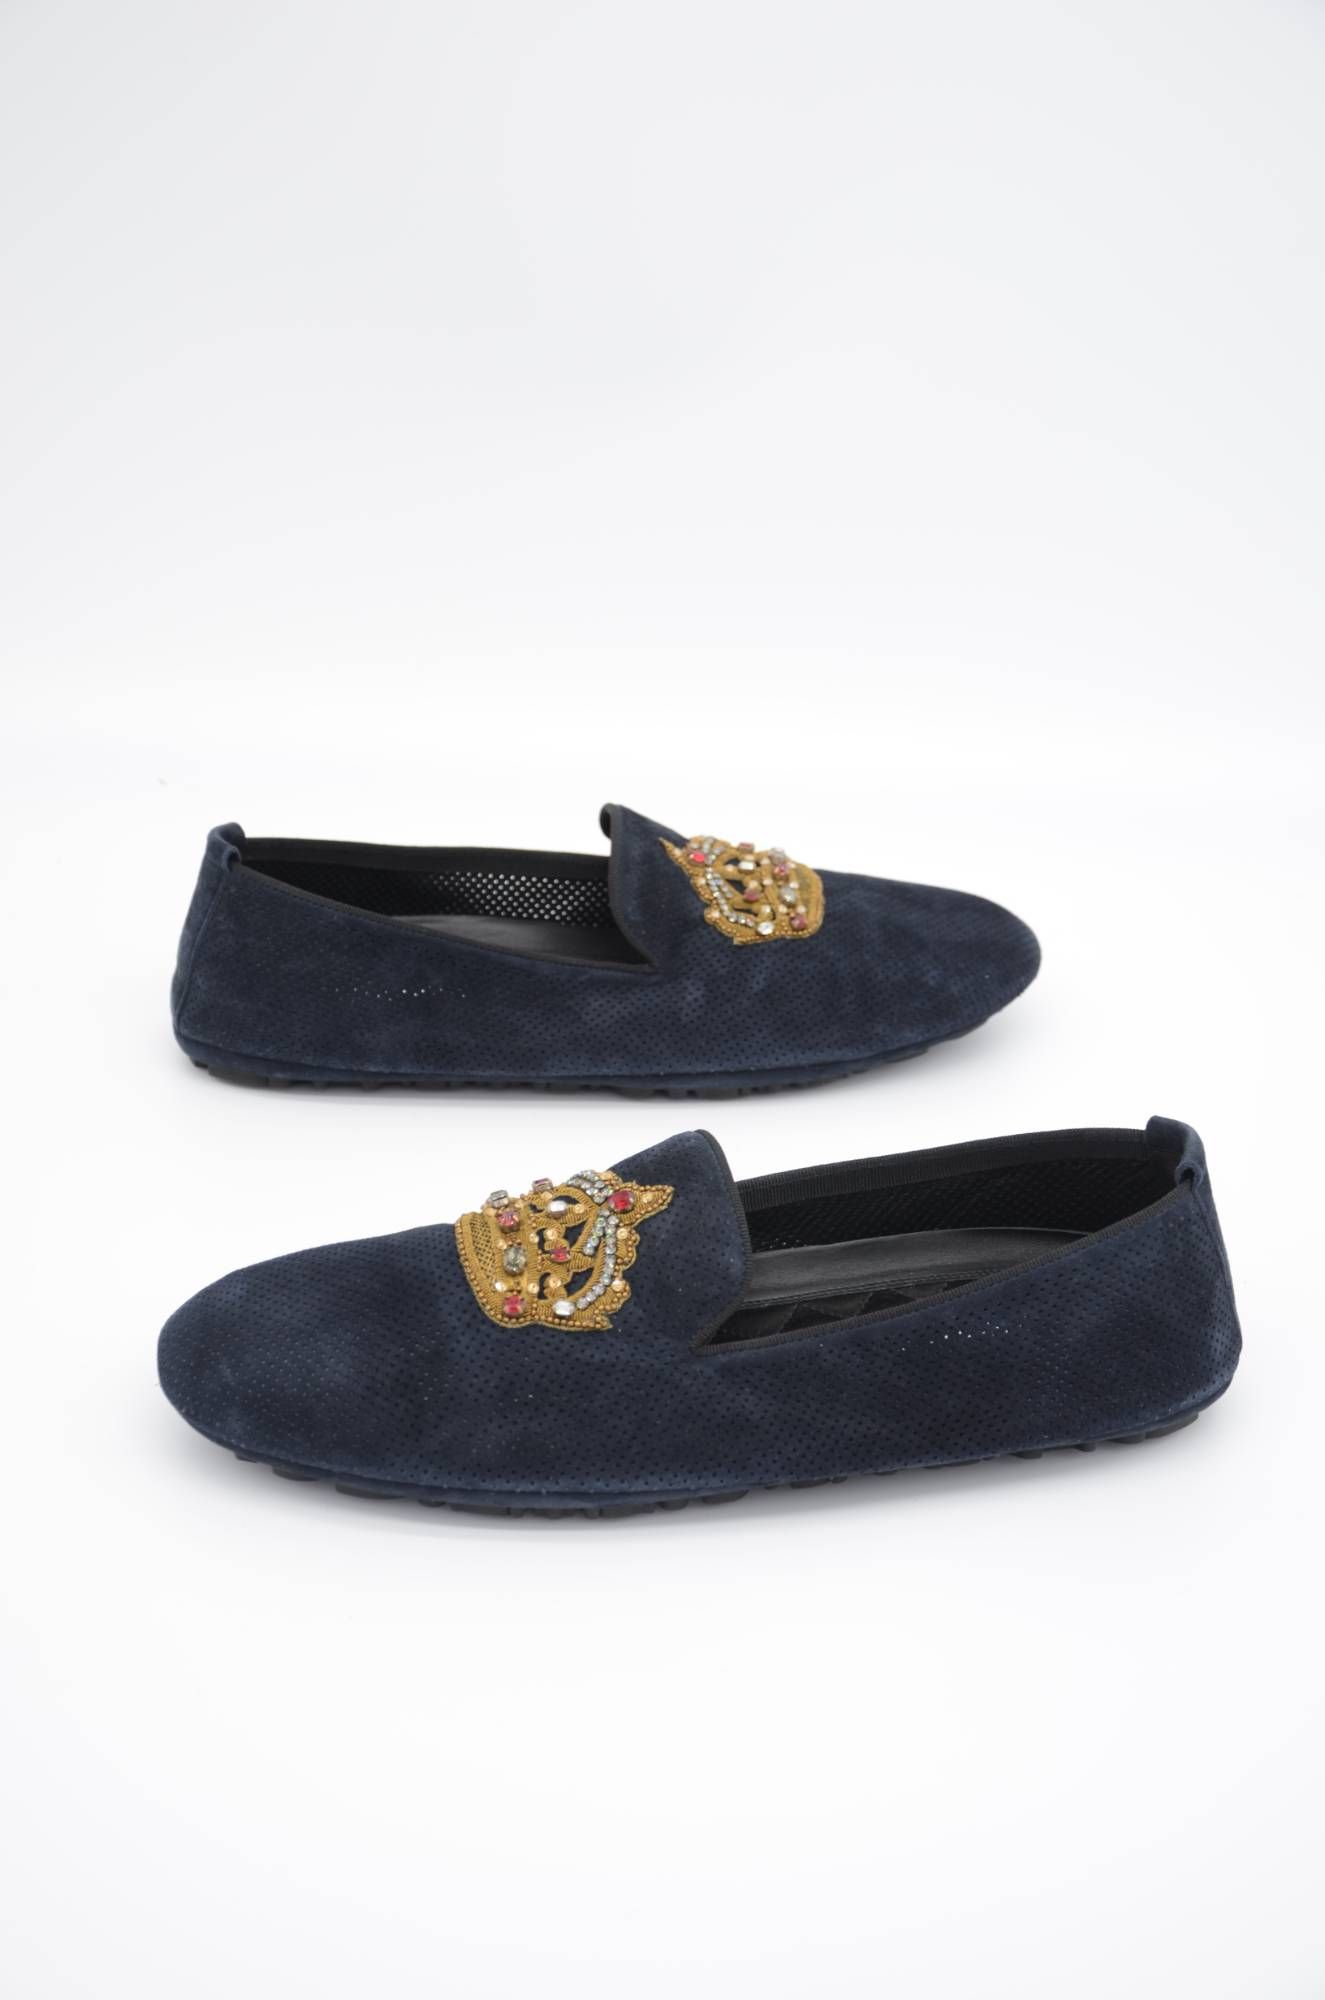 Dolce & Gabbana Men Crown Leather Loafers
Embroidered Applications